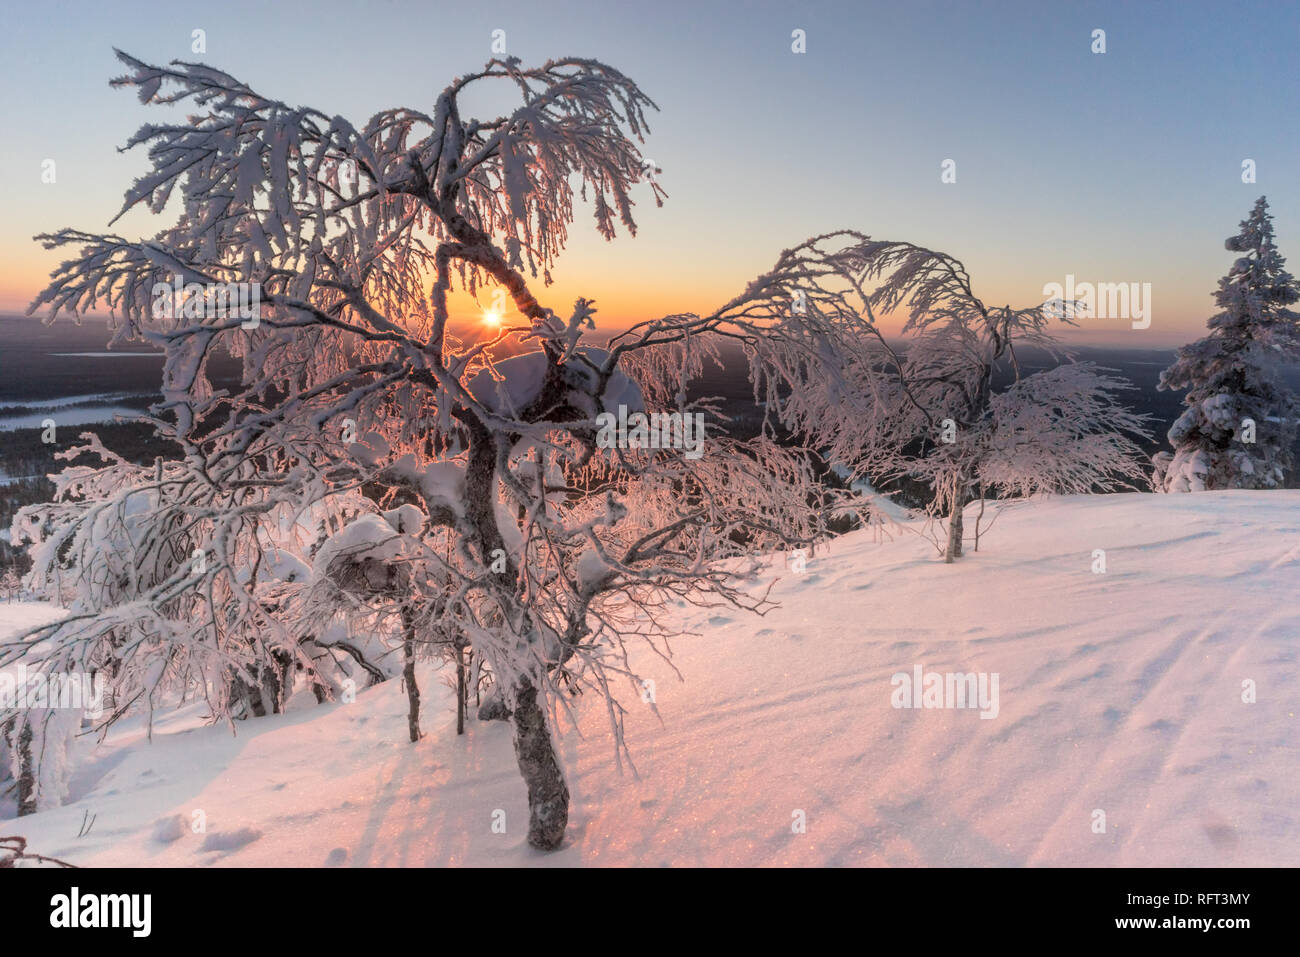 Sunrise with snow covered frozen trees in Finnish Lapland. Picture was taken in Pyha, Finland. Stock Photo